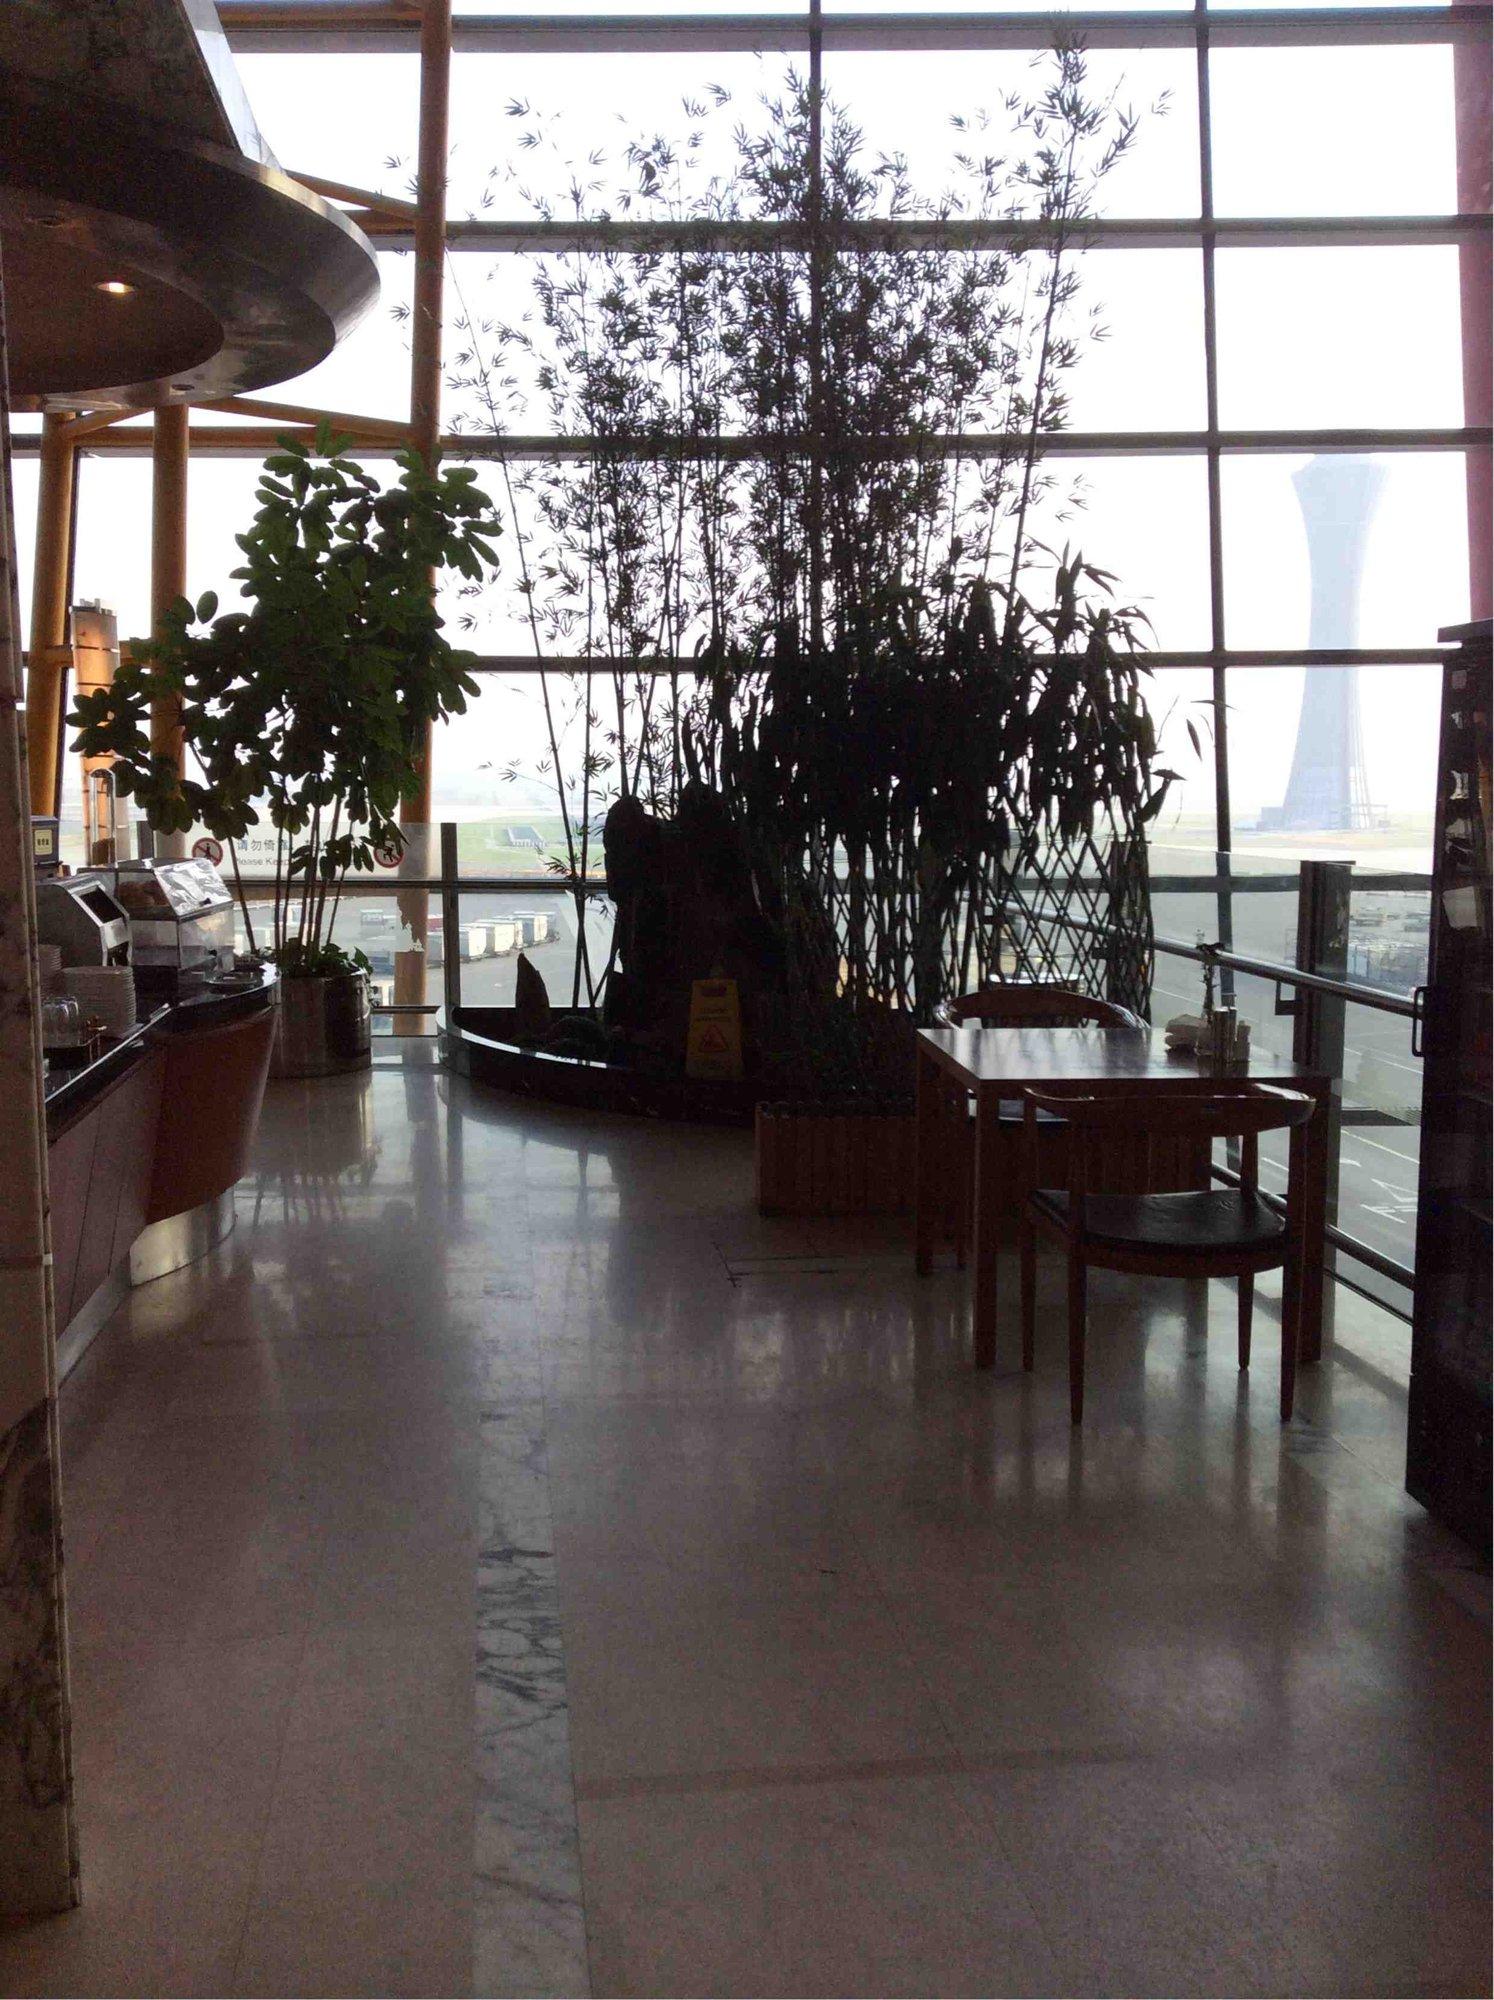 Air China International First Class Lounge image 35 of 38